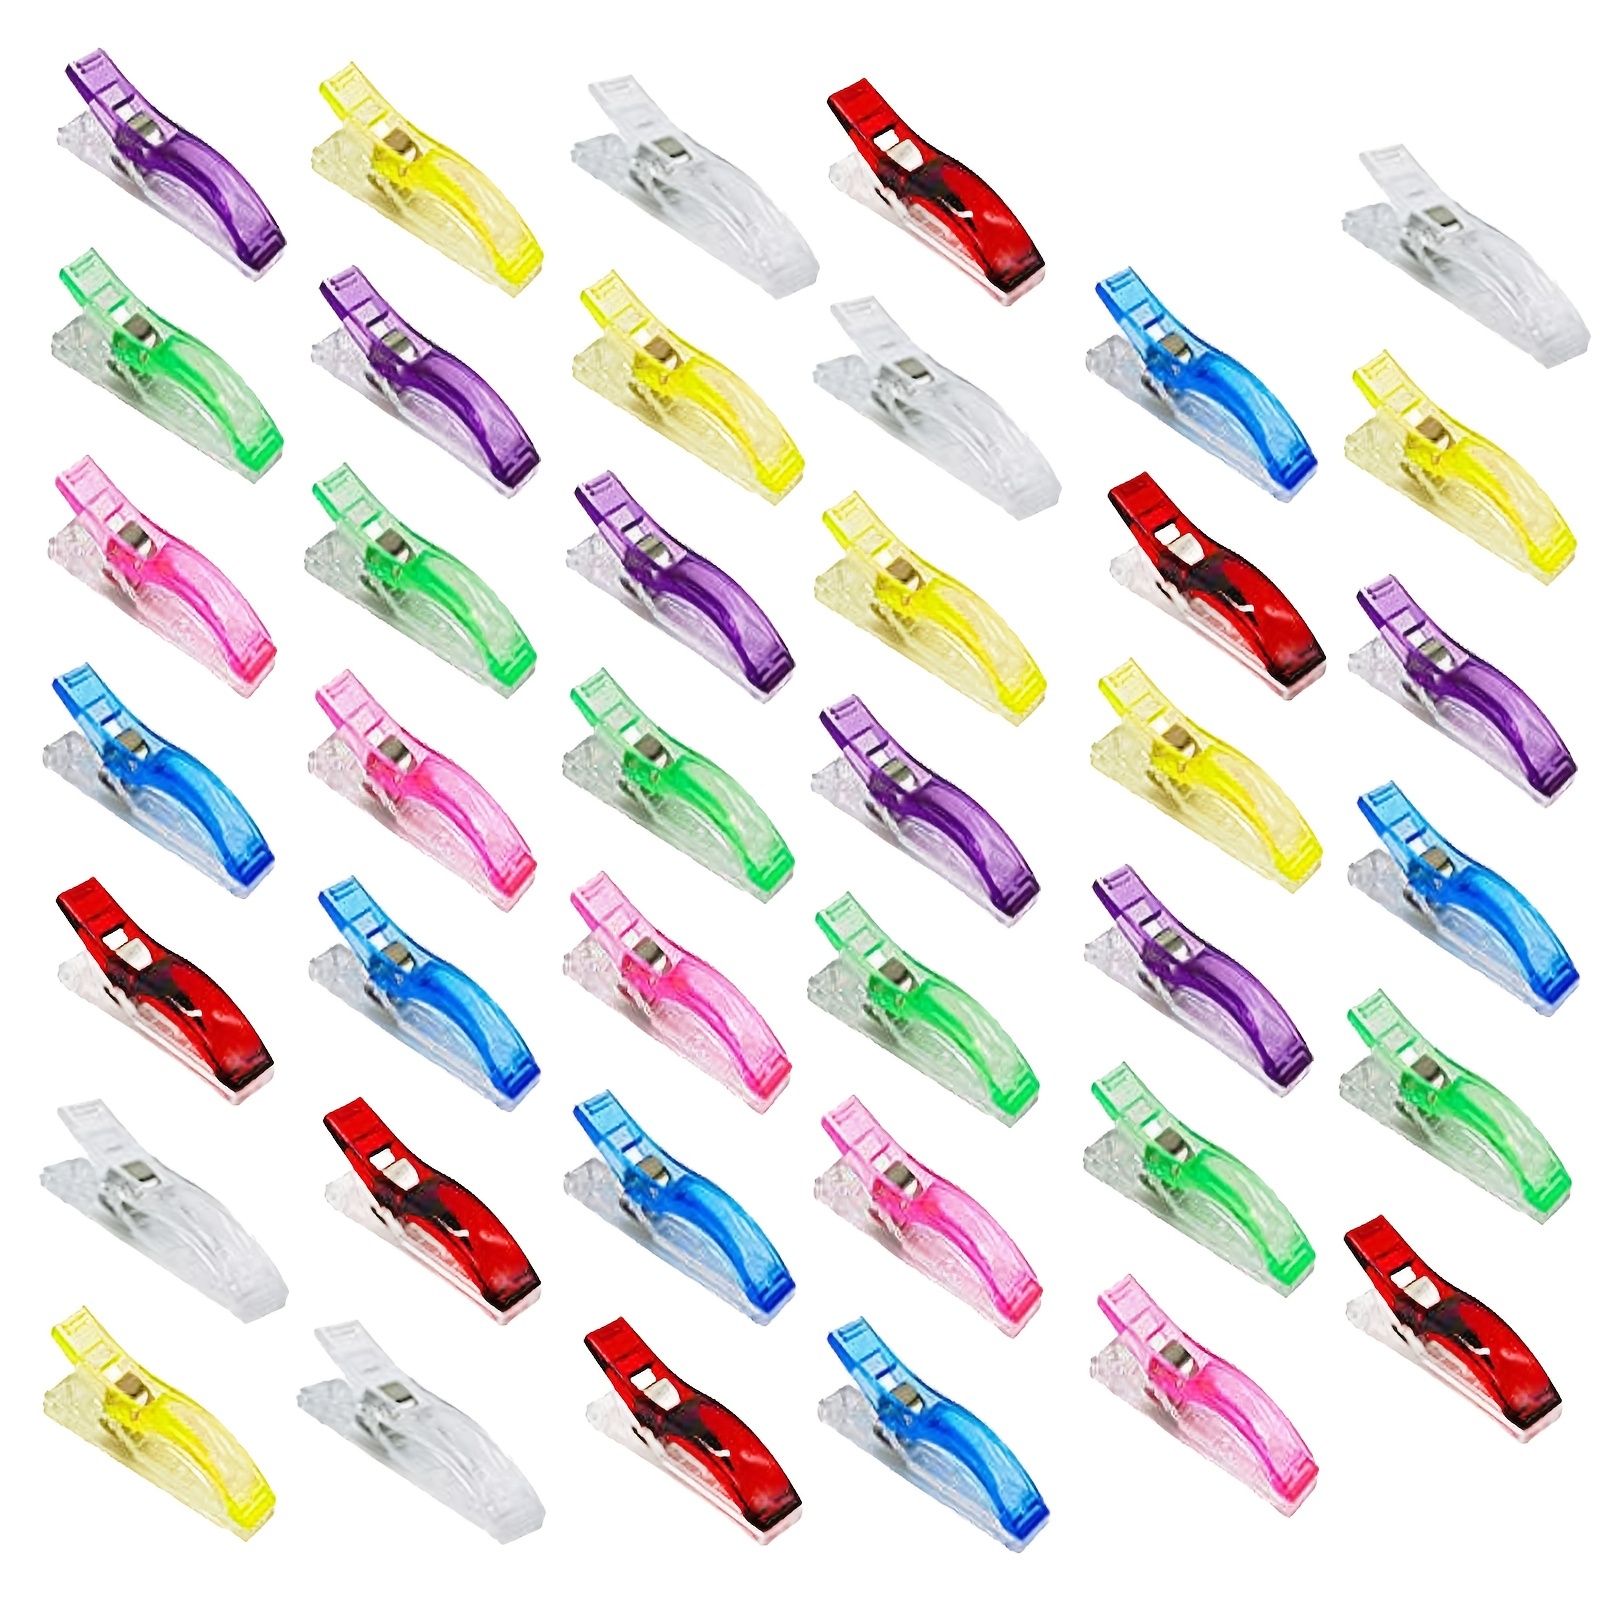 Pack of 20 Multipurpose Sewing Clips Assorted Colors for Sewing Craft  Clamps Crafting Crochet Knitting Quilting Crafting Blinder Clips